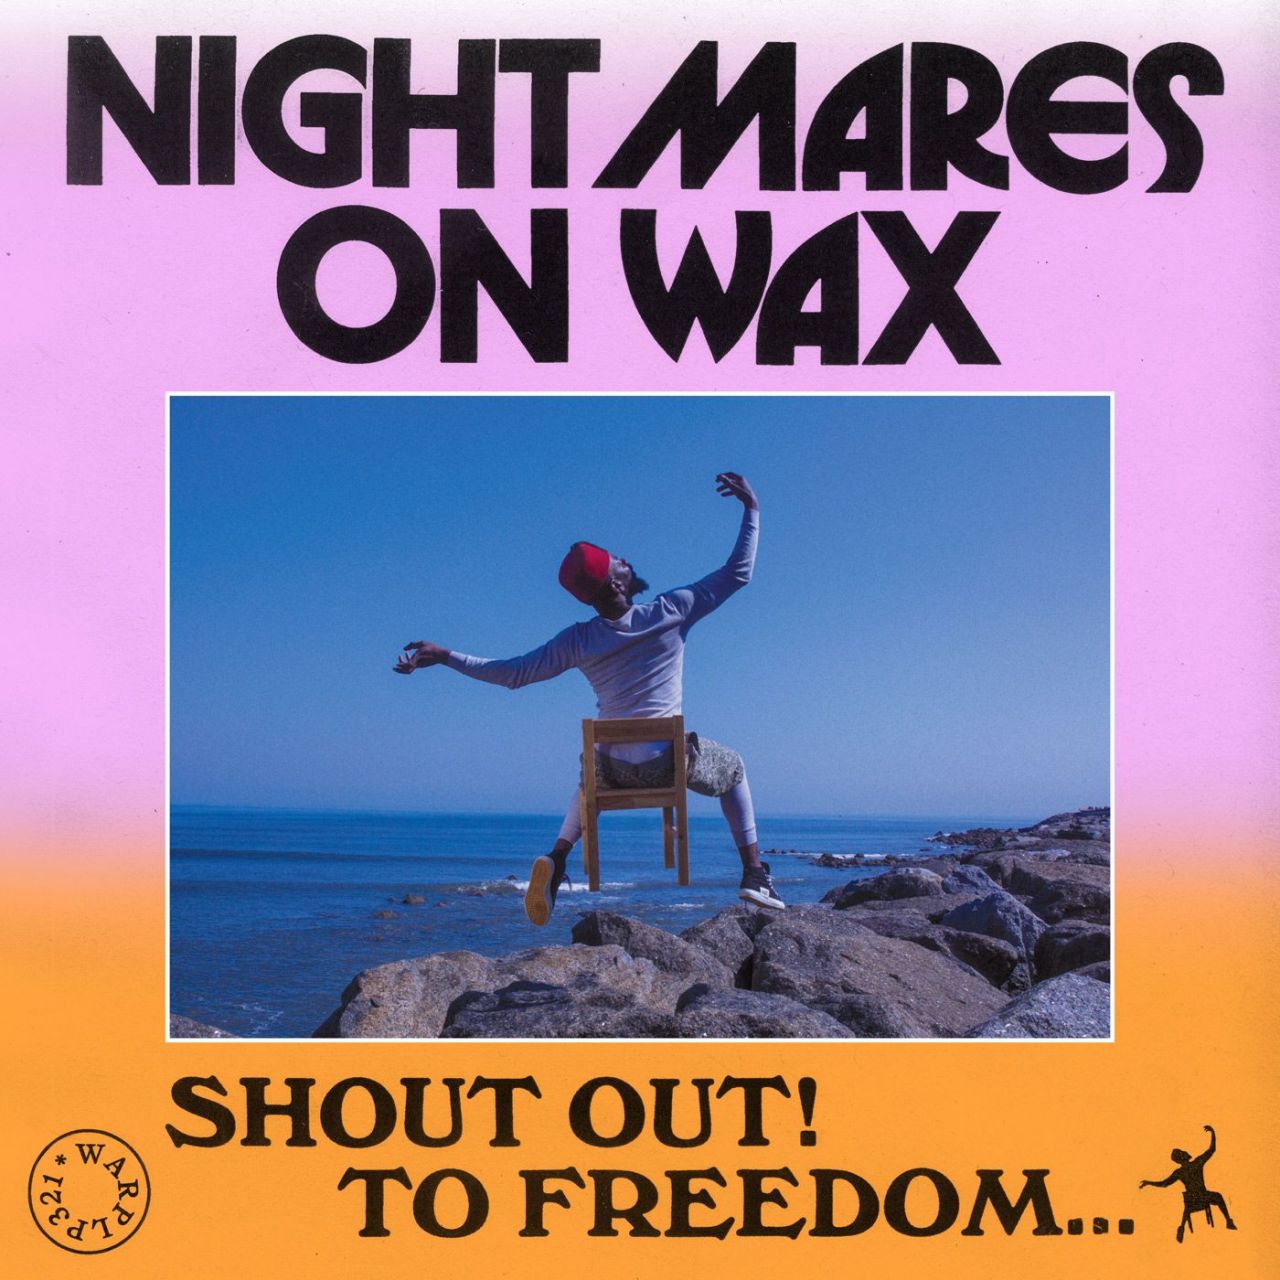 Nightmares On Wax - Shout Out! To Freedom... - CD